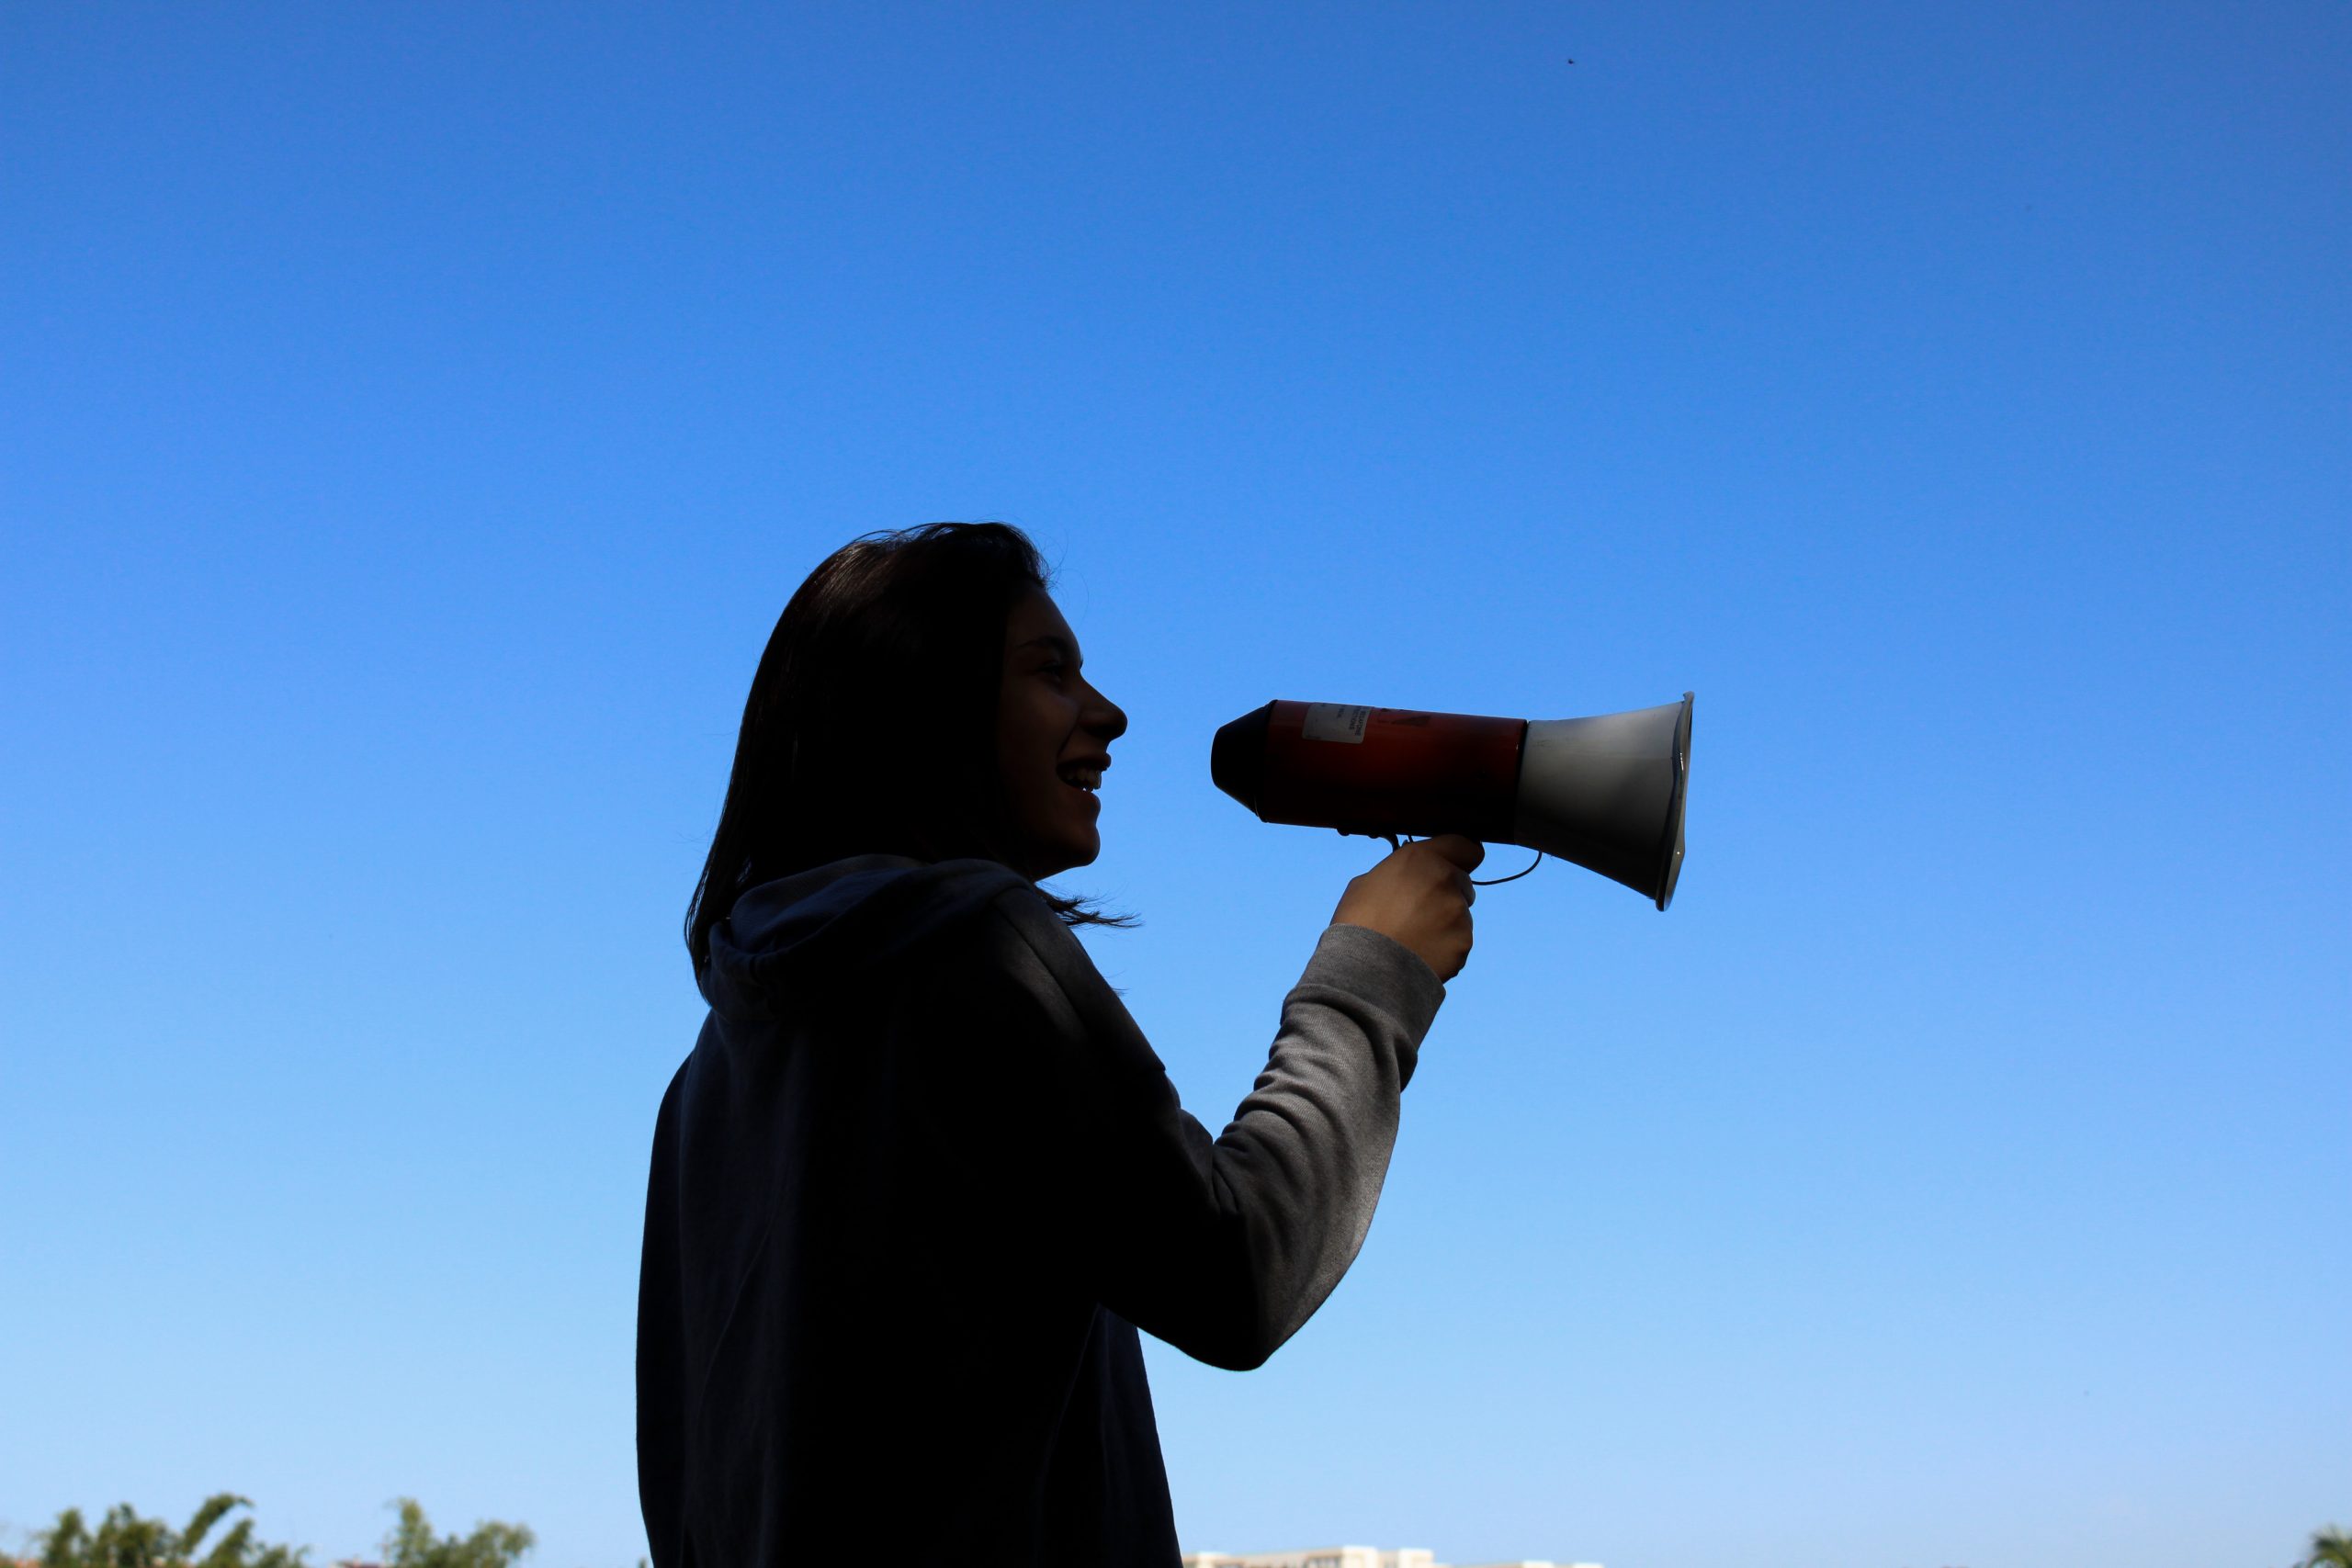 Silhouette of a person holding a megaphone during a protest